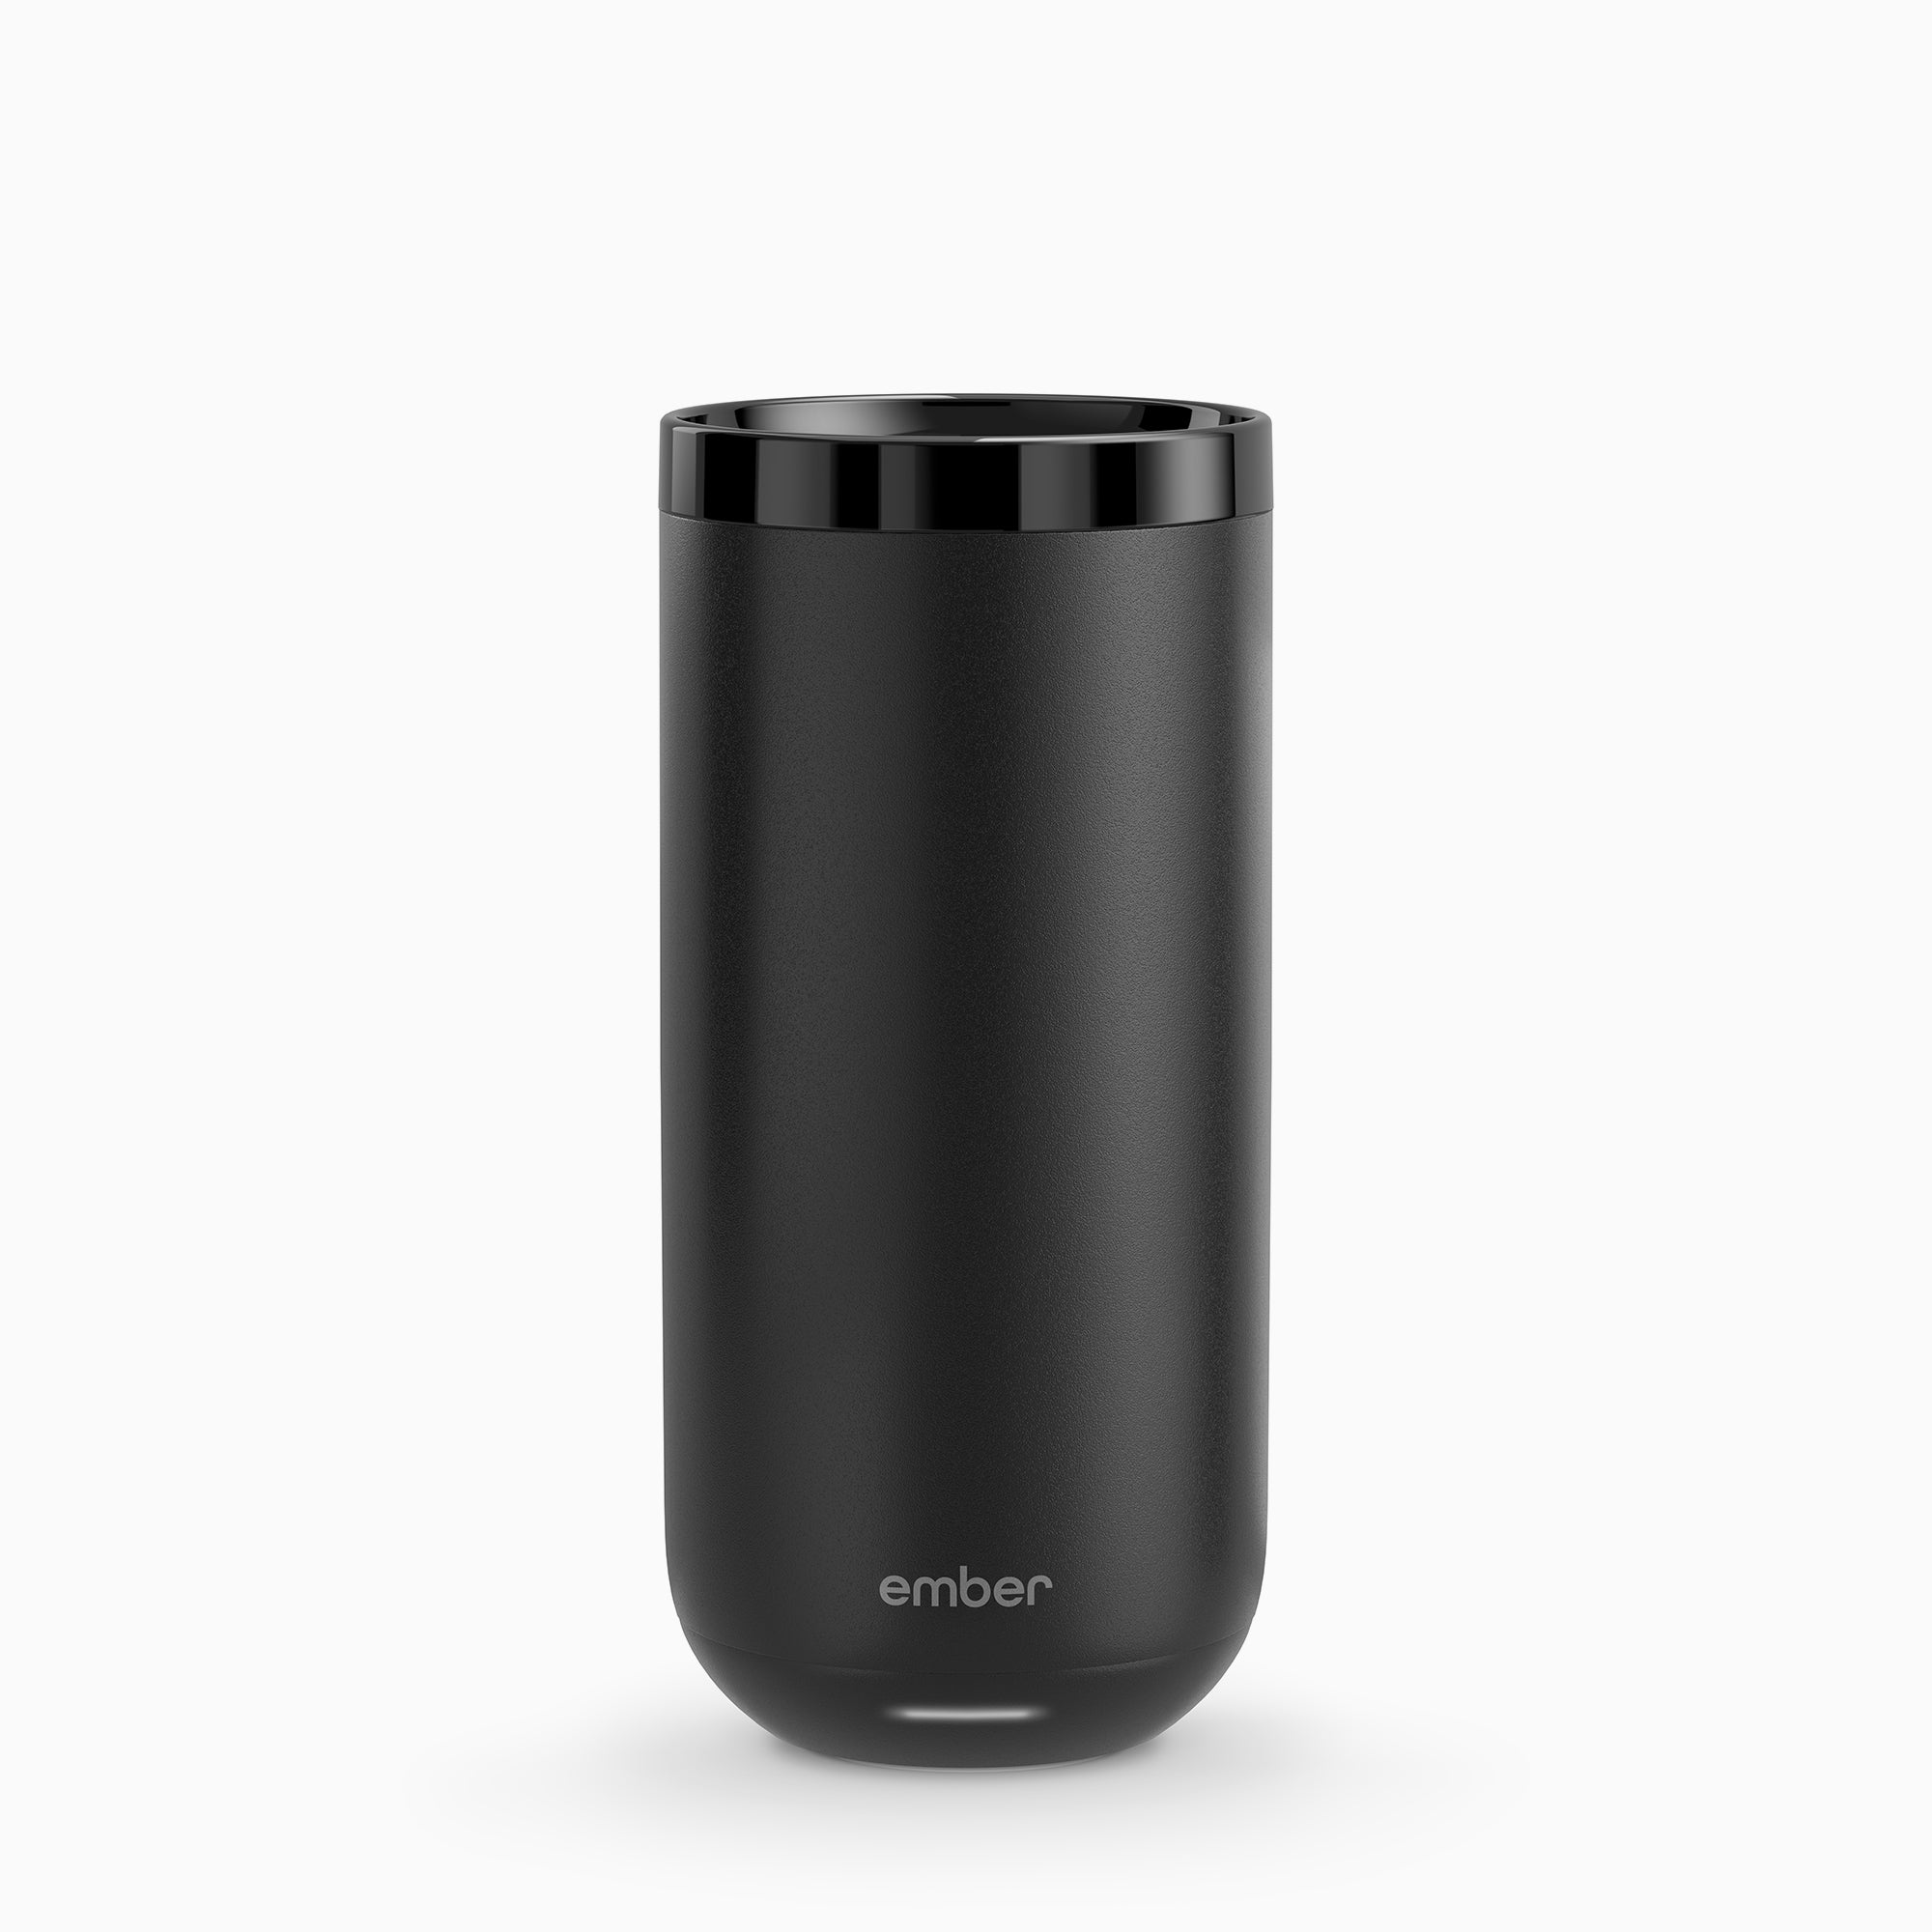 Ember's Smart Tumbler Keeps Your Coffee at Temp Wherever You Go